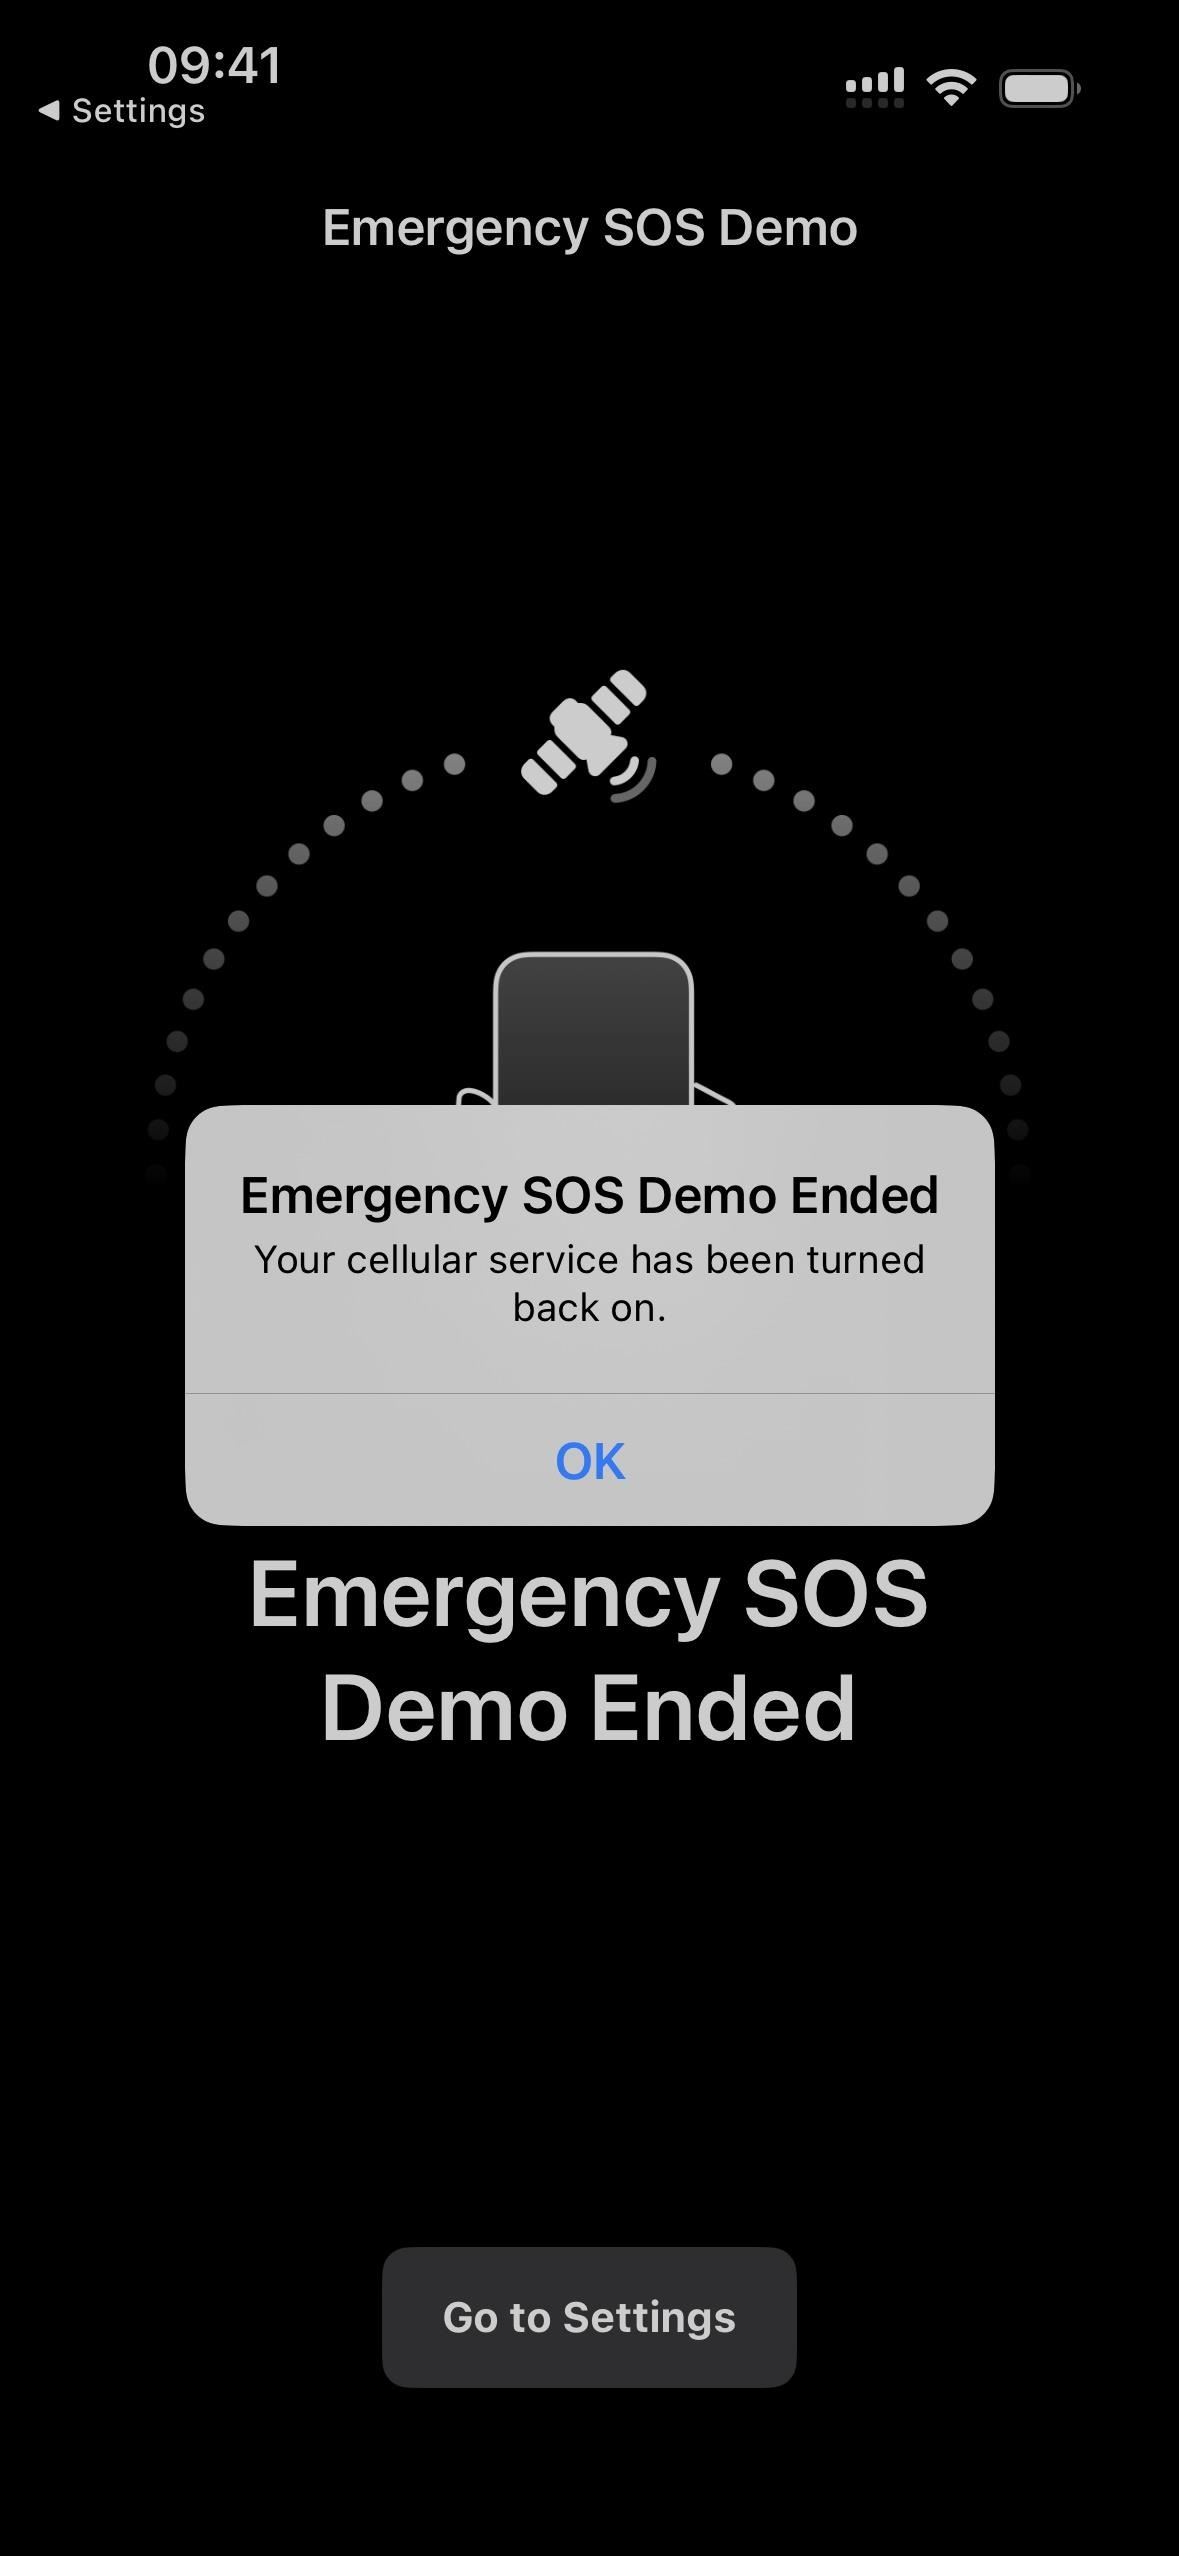 8 Ways to Call Emergency Services on Your iPhone When You Can't Dial 911 Manually